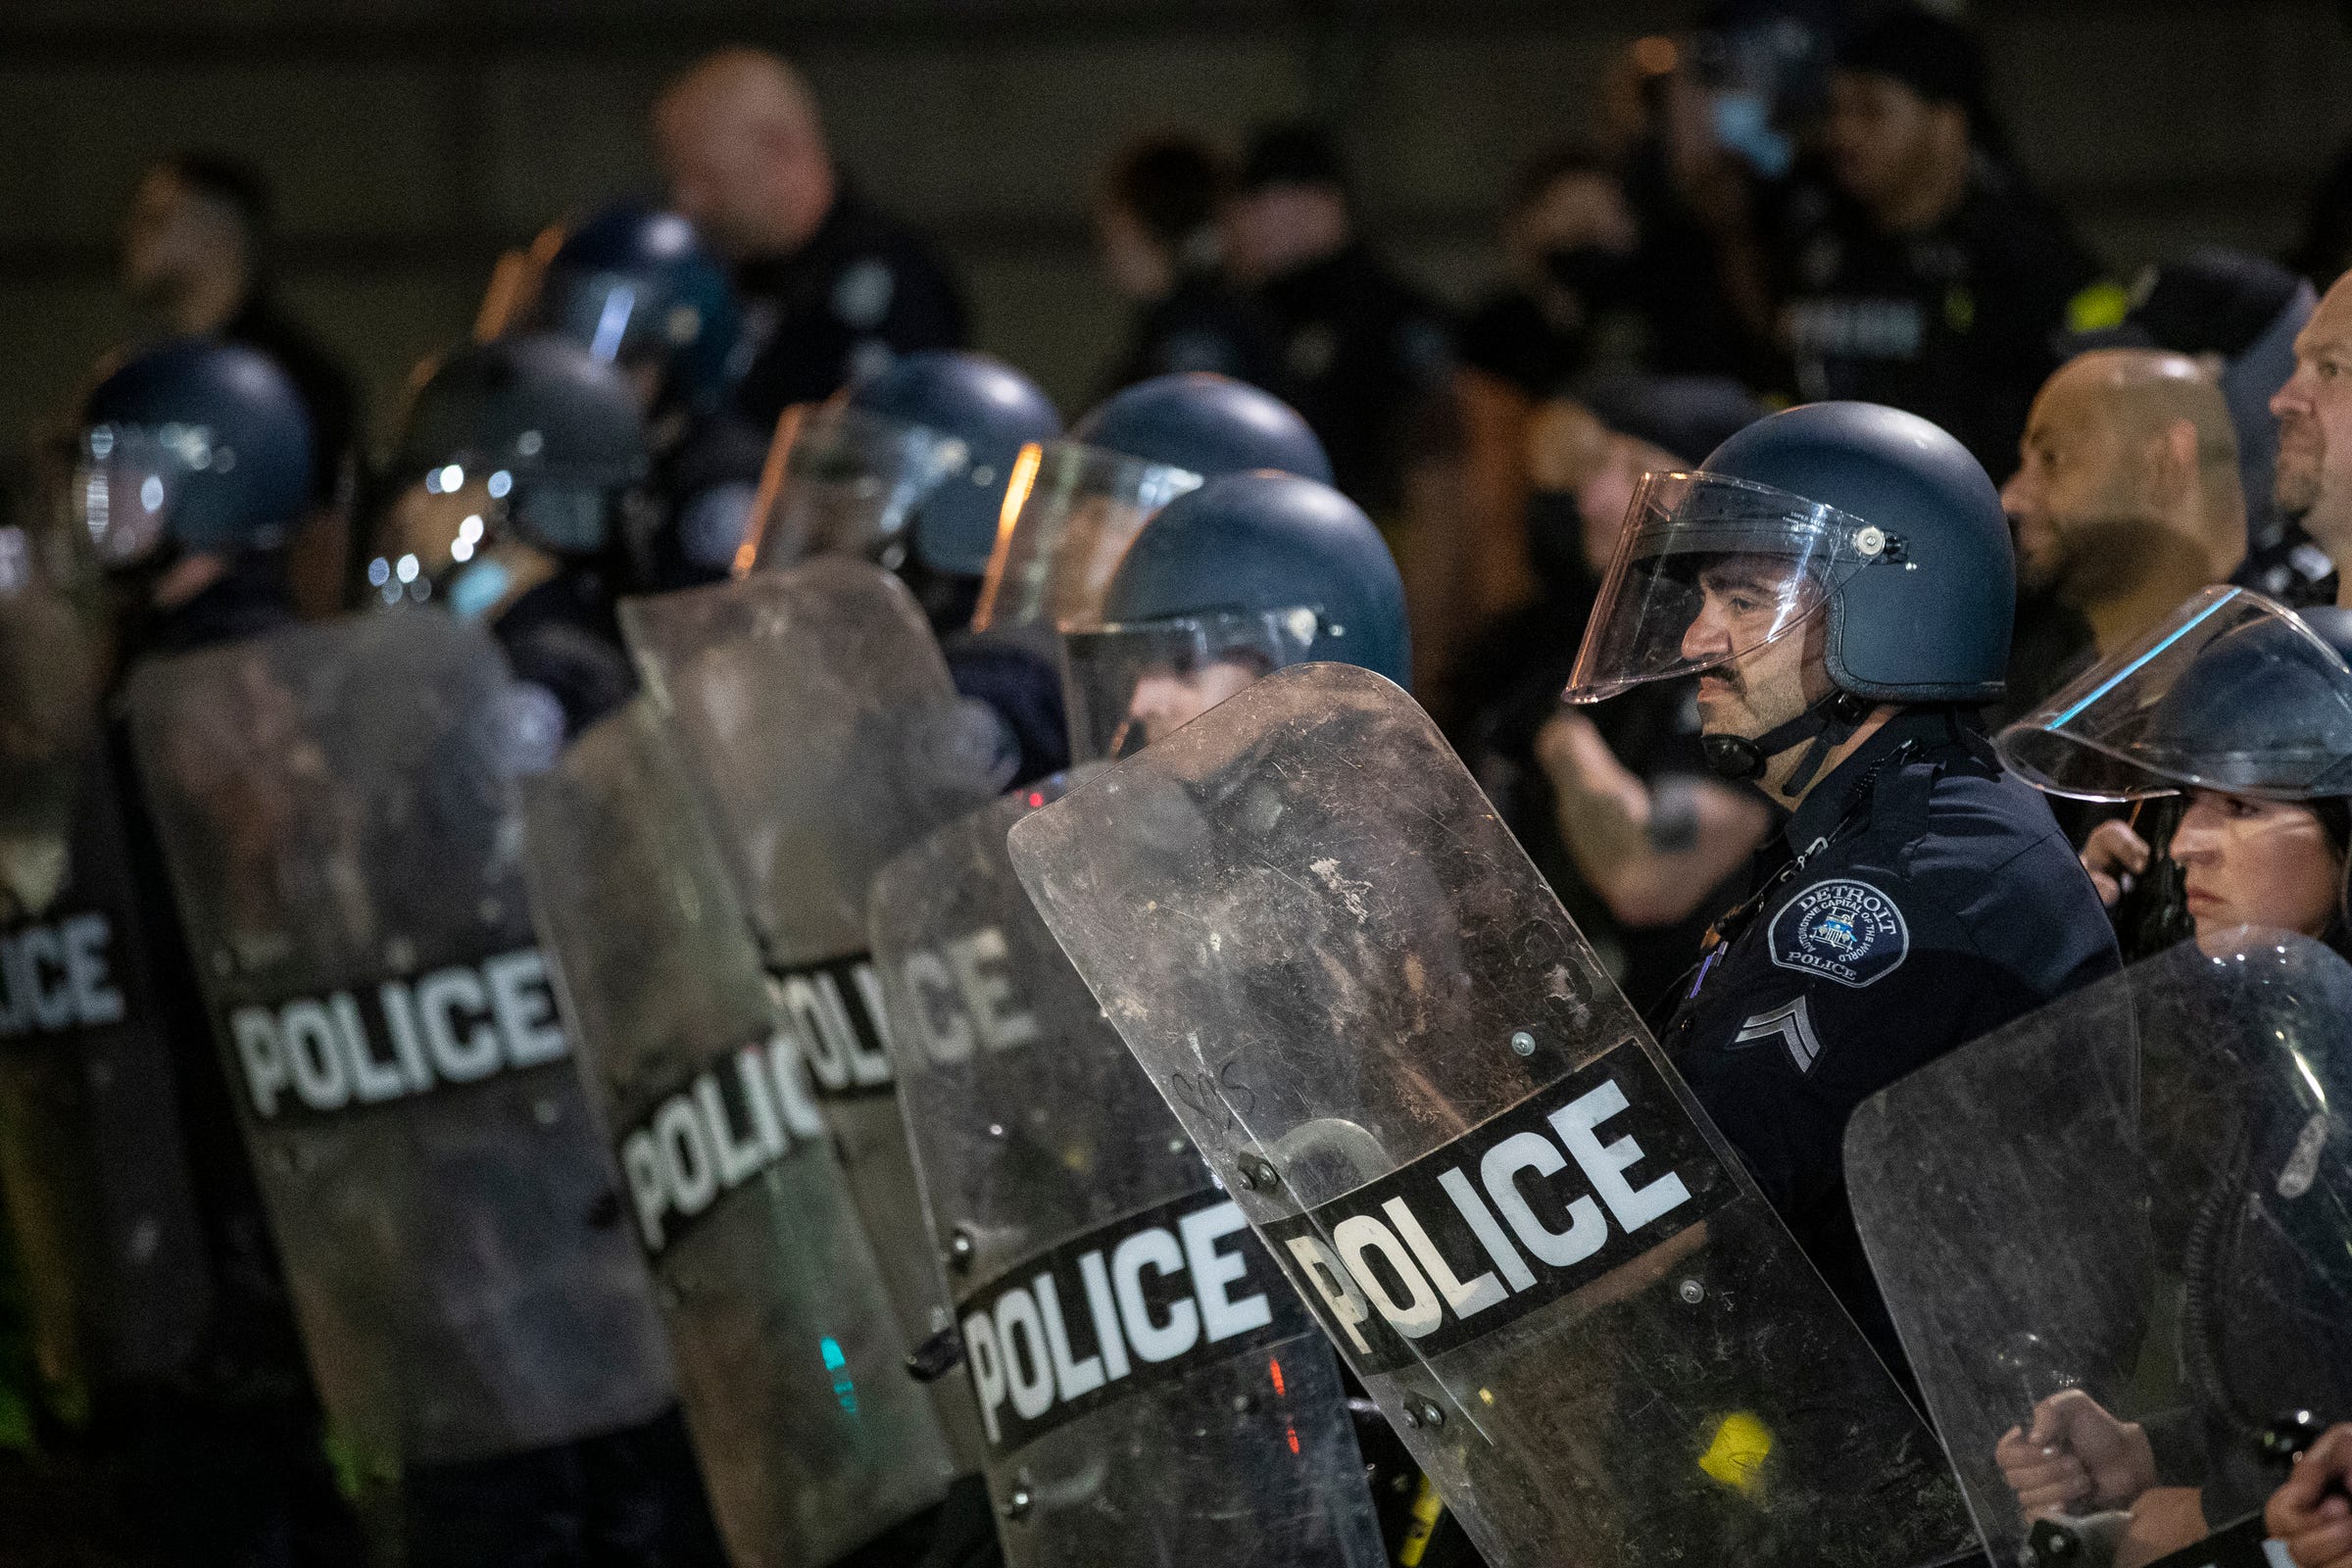  Detroit Police officers in riot gear watch protesters in downtown Detroit, Friday, May 29, 2020.